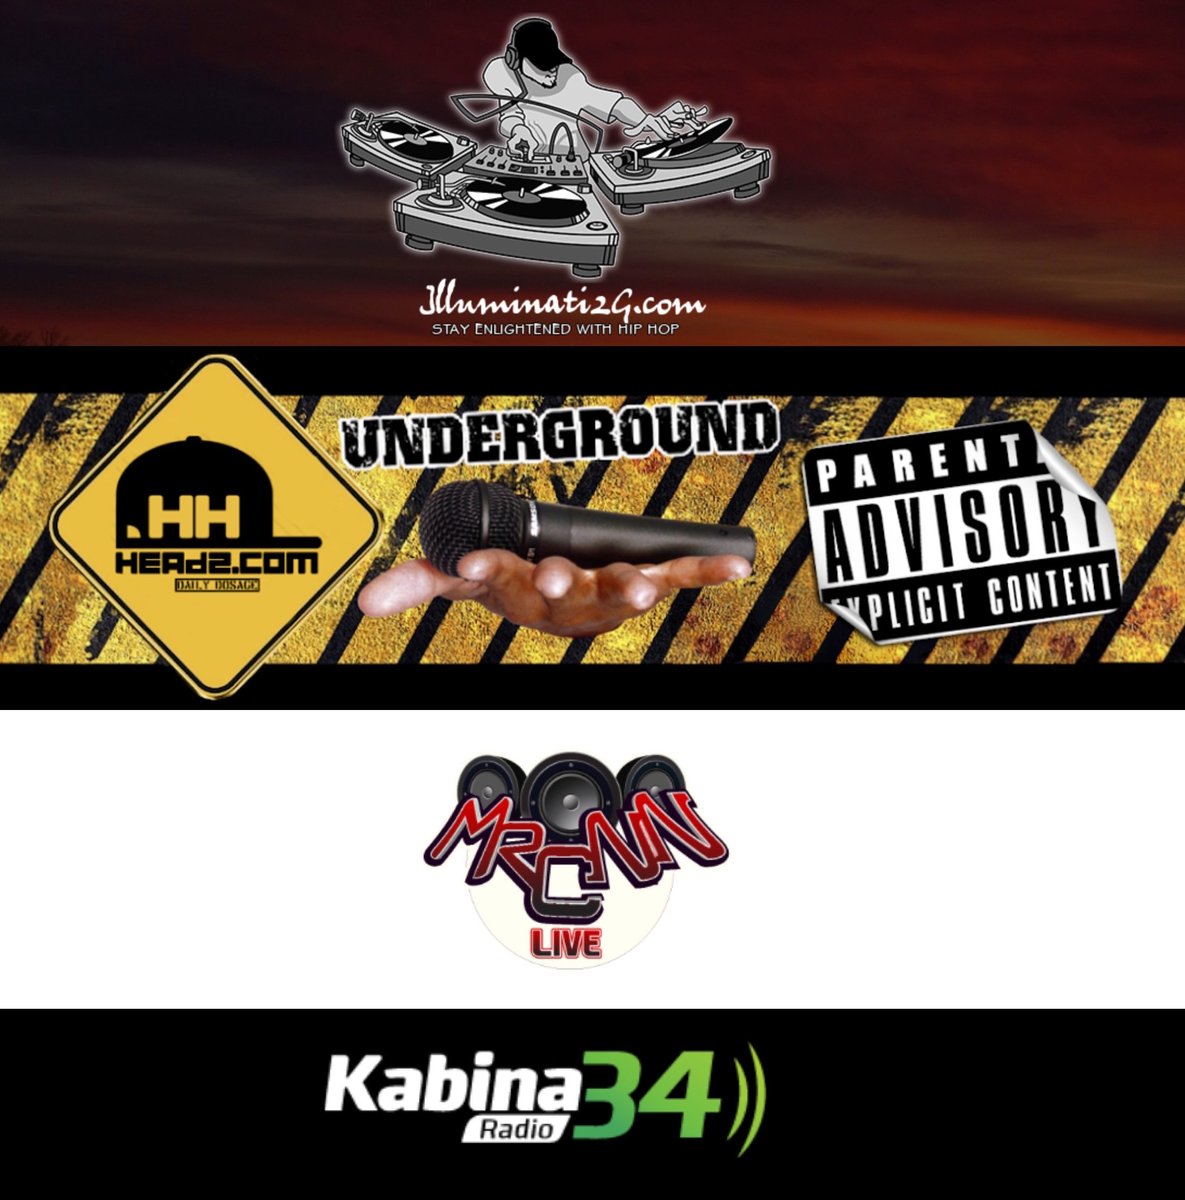 Much love to @Illuminati2G, @HHHeadzCom, @MRCPromotion and @kabina34radio for the blog support for Lxvndr x @Tachichiscotia's 'One For The Smoke' single, produced by @BoFaatBeatz!